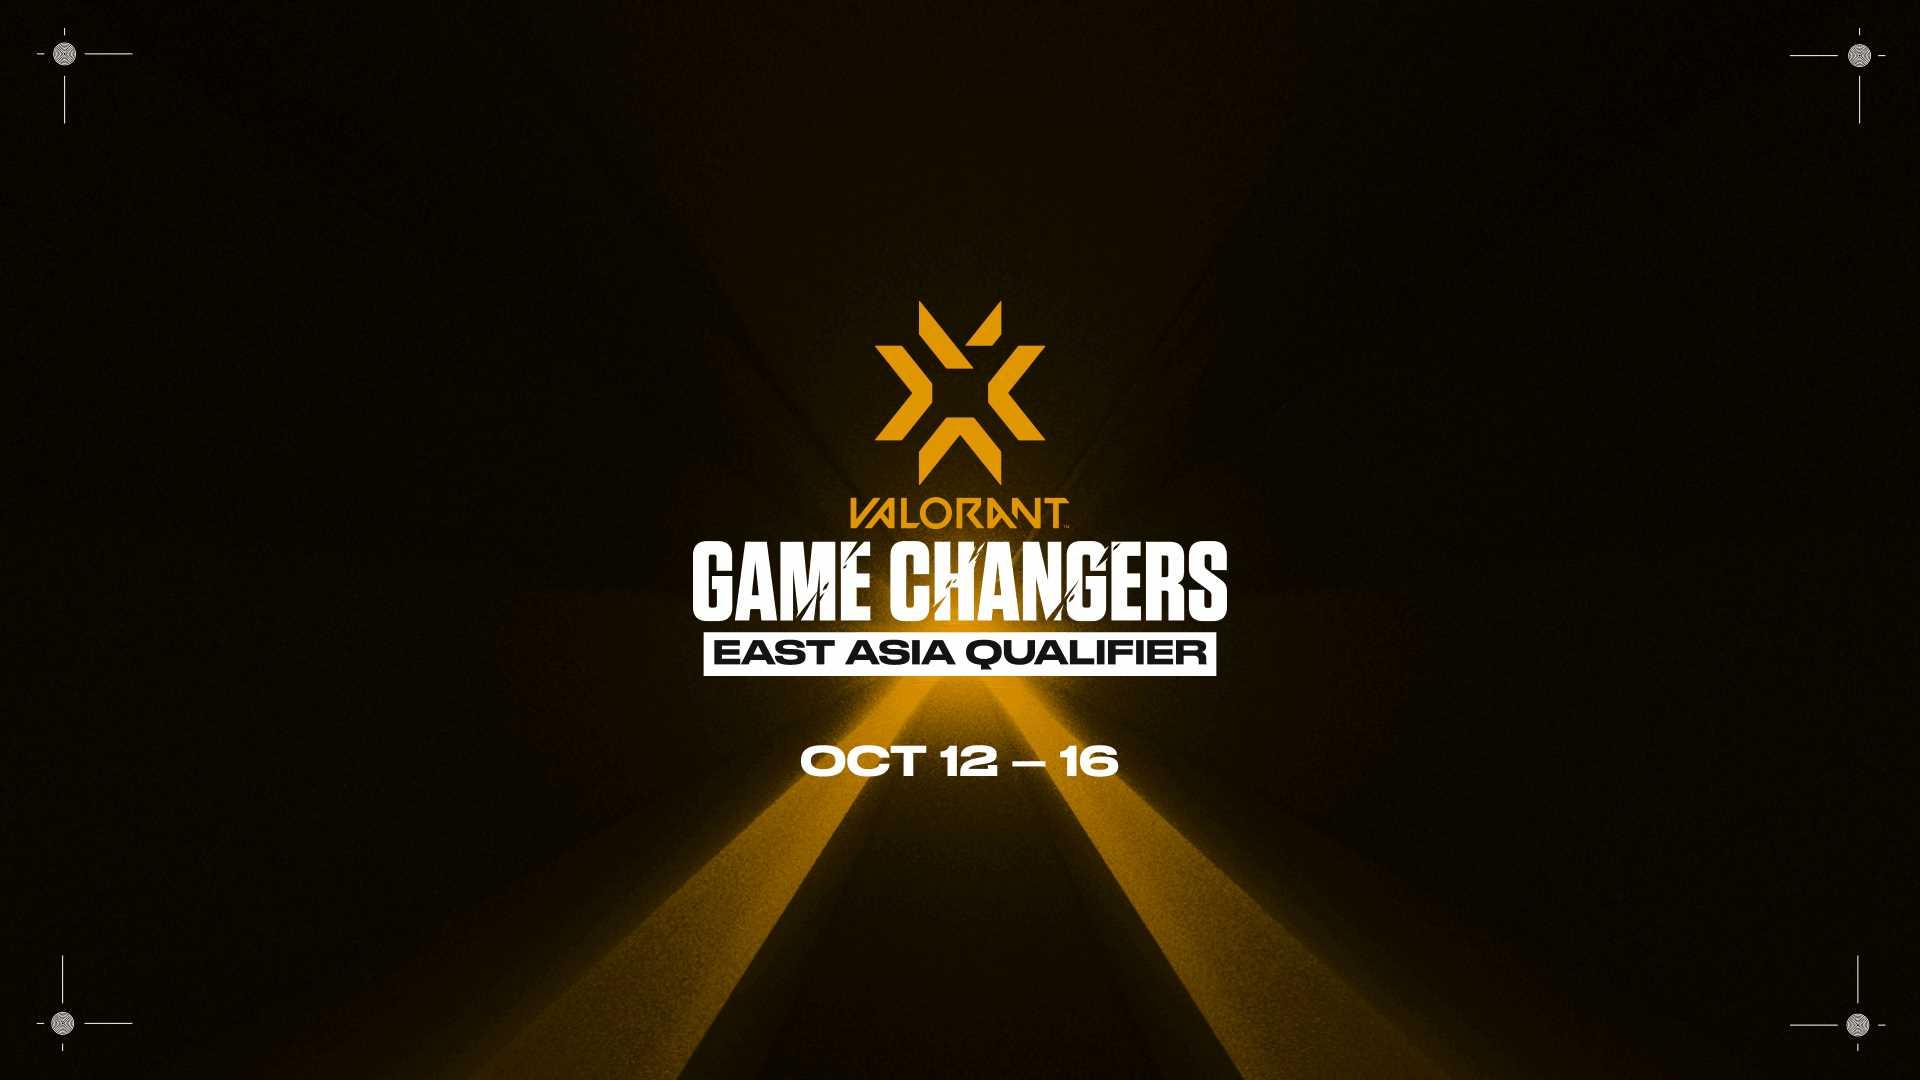 VALORANT Game Changers East Asia Qualifier feature image